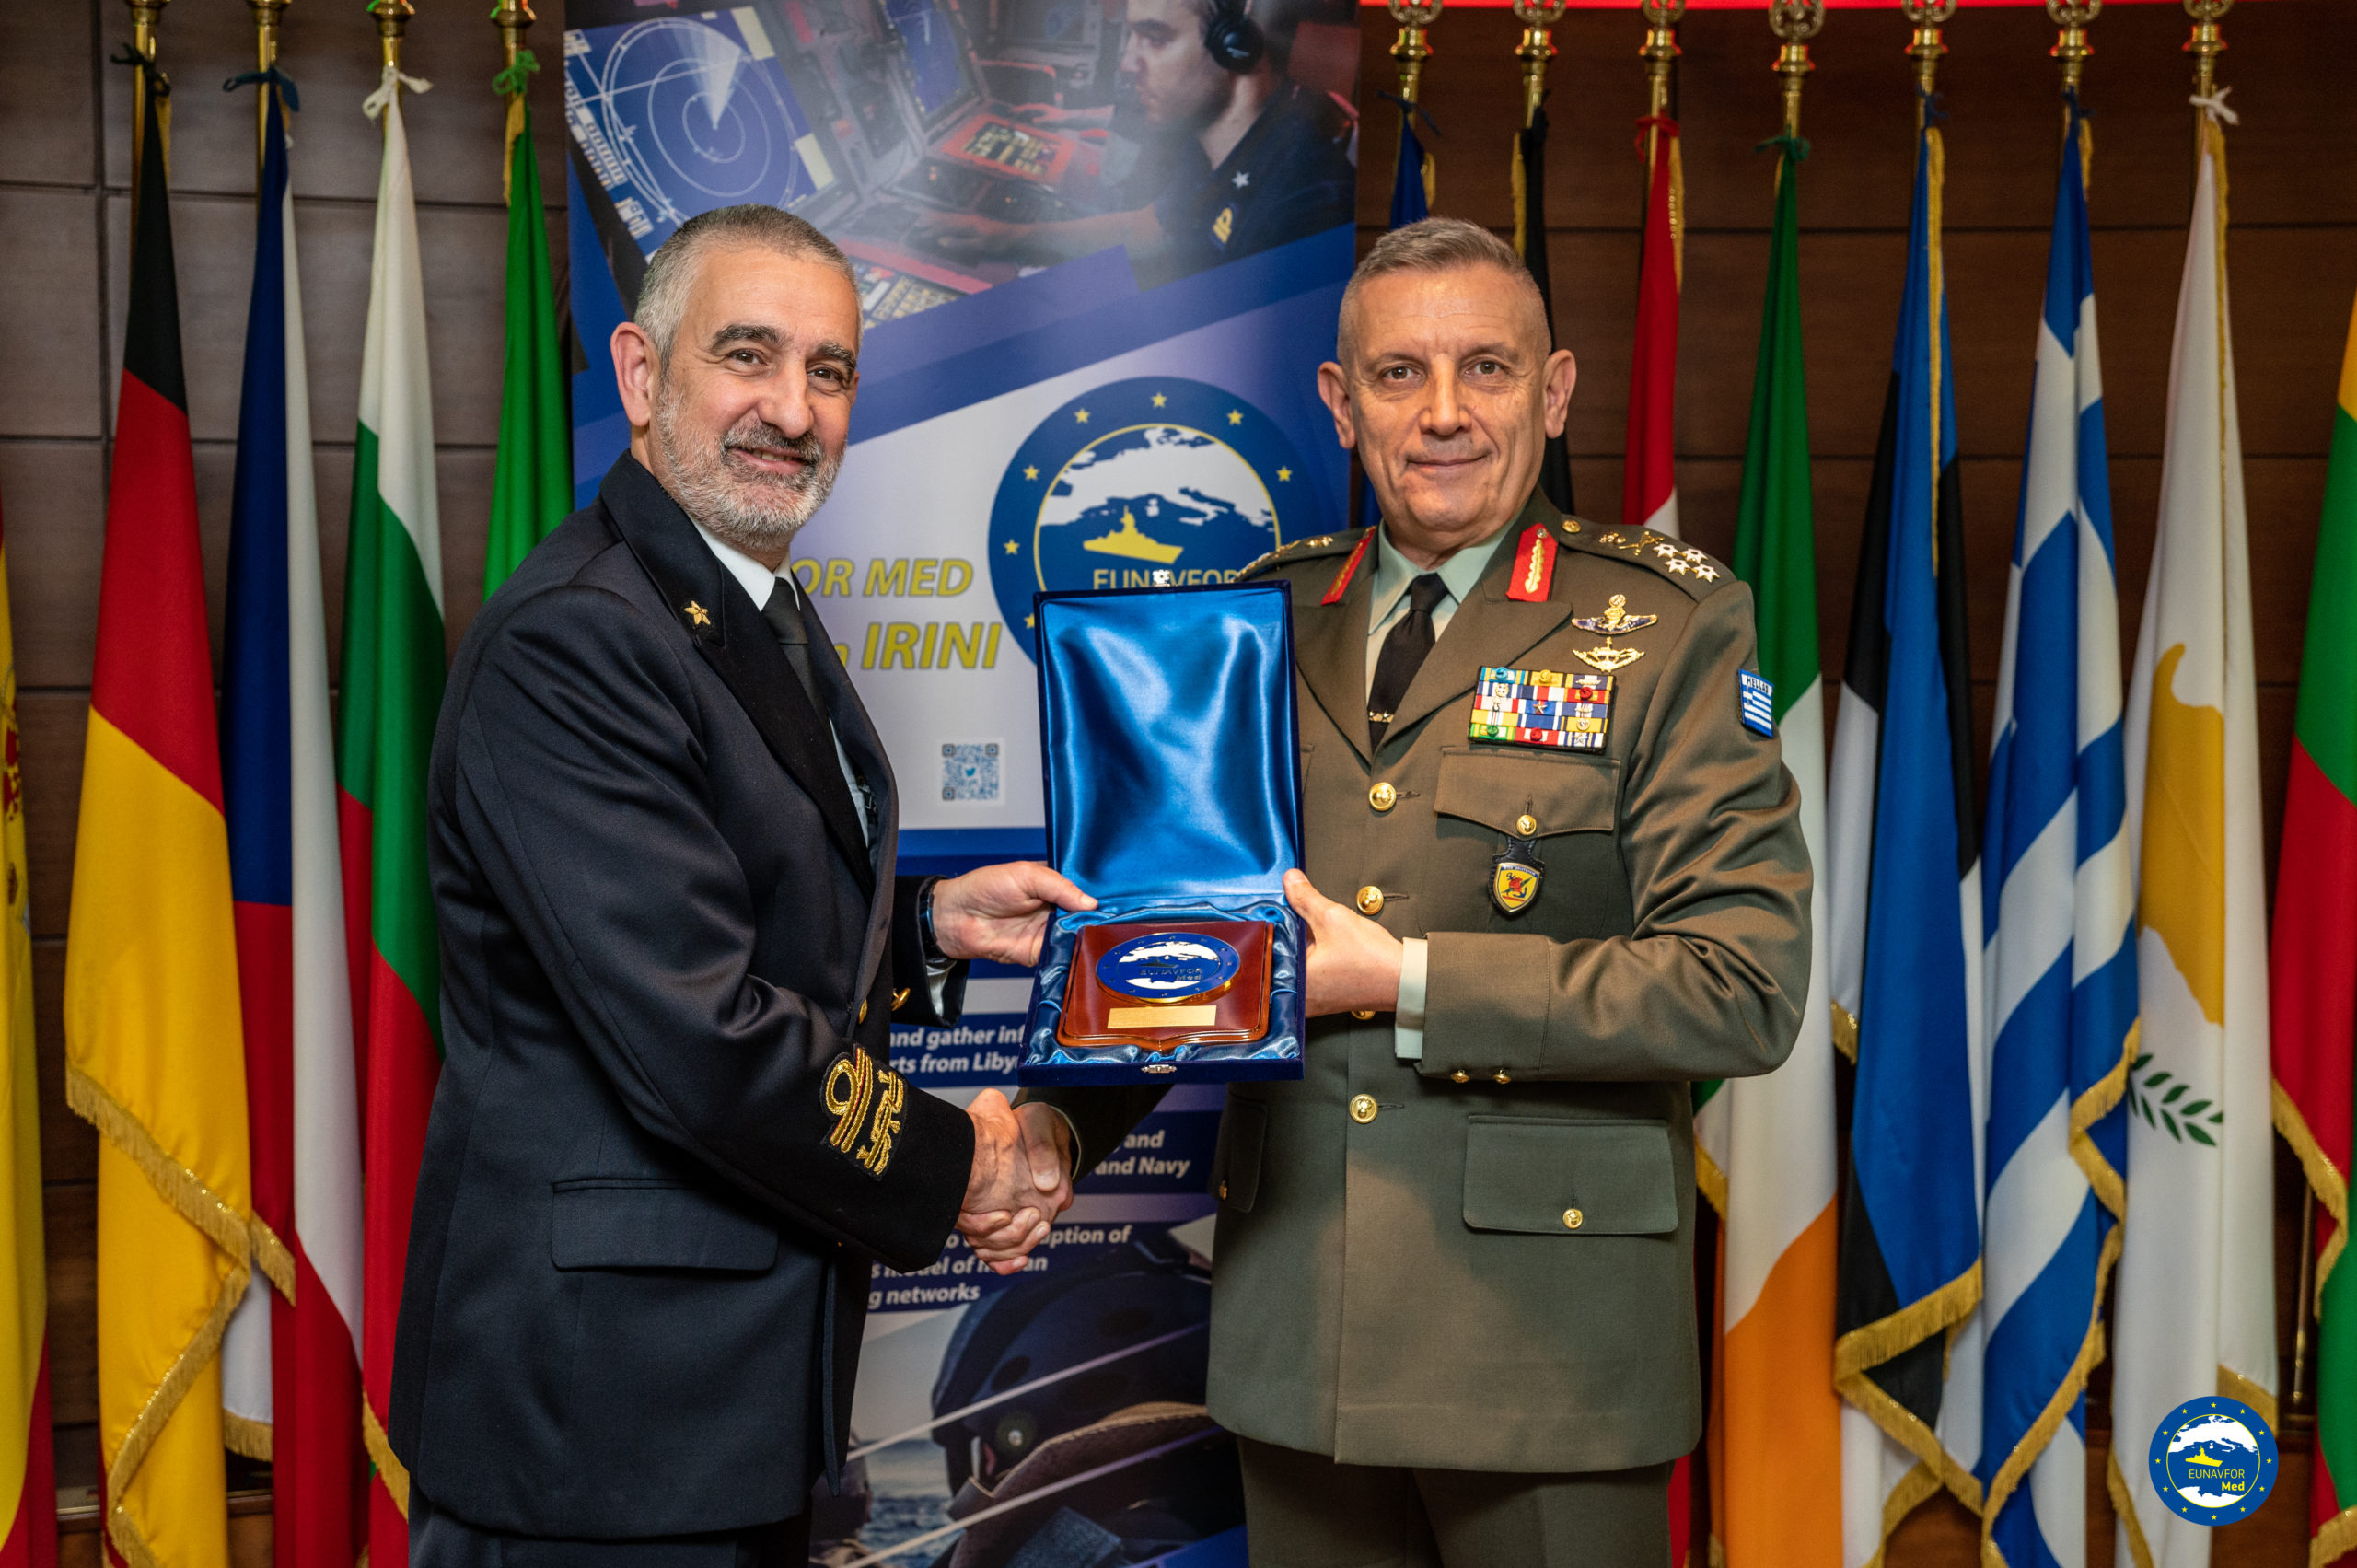 General Konstantinos FLOROS, Chief of the Hellenic National Defence General Staff,  visited OHQ